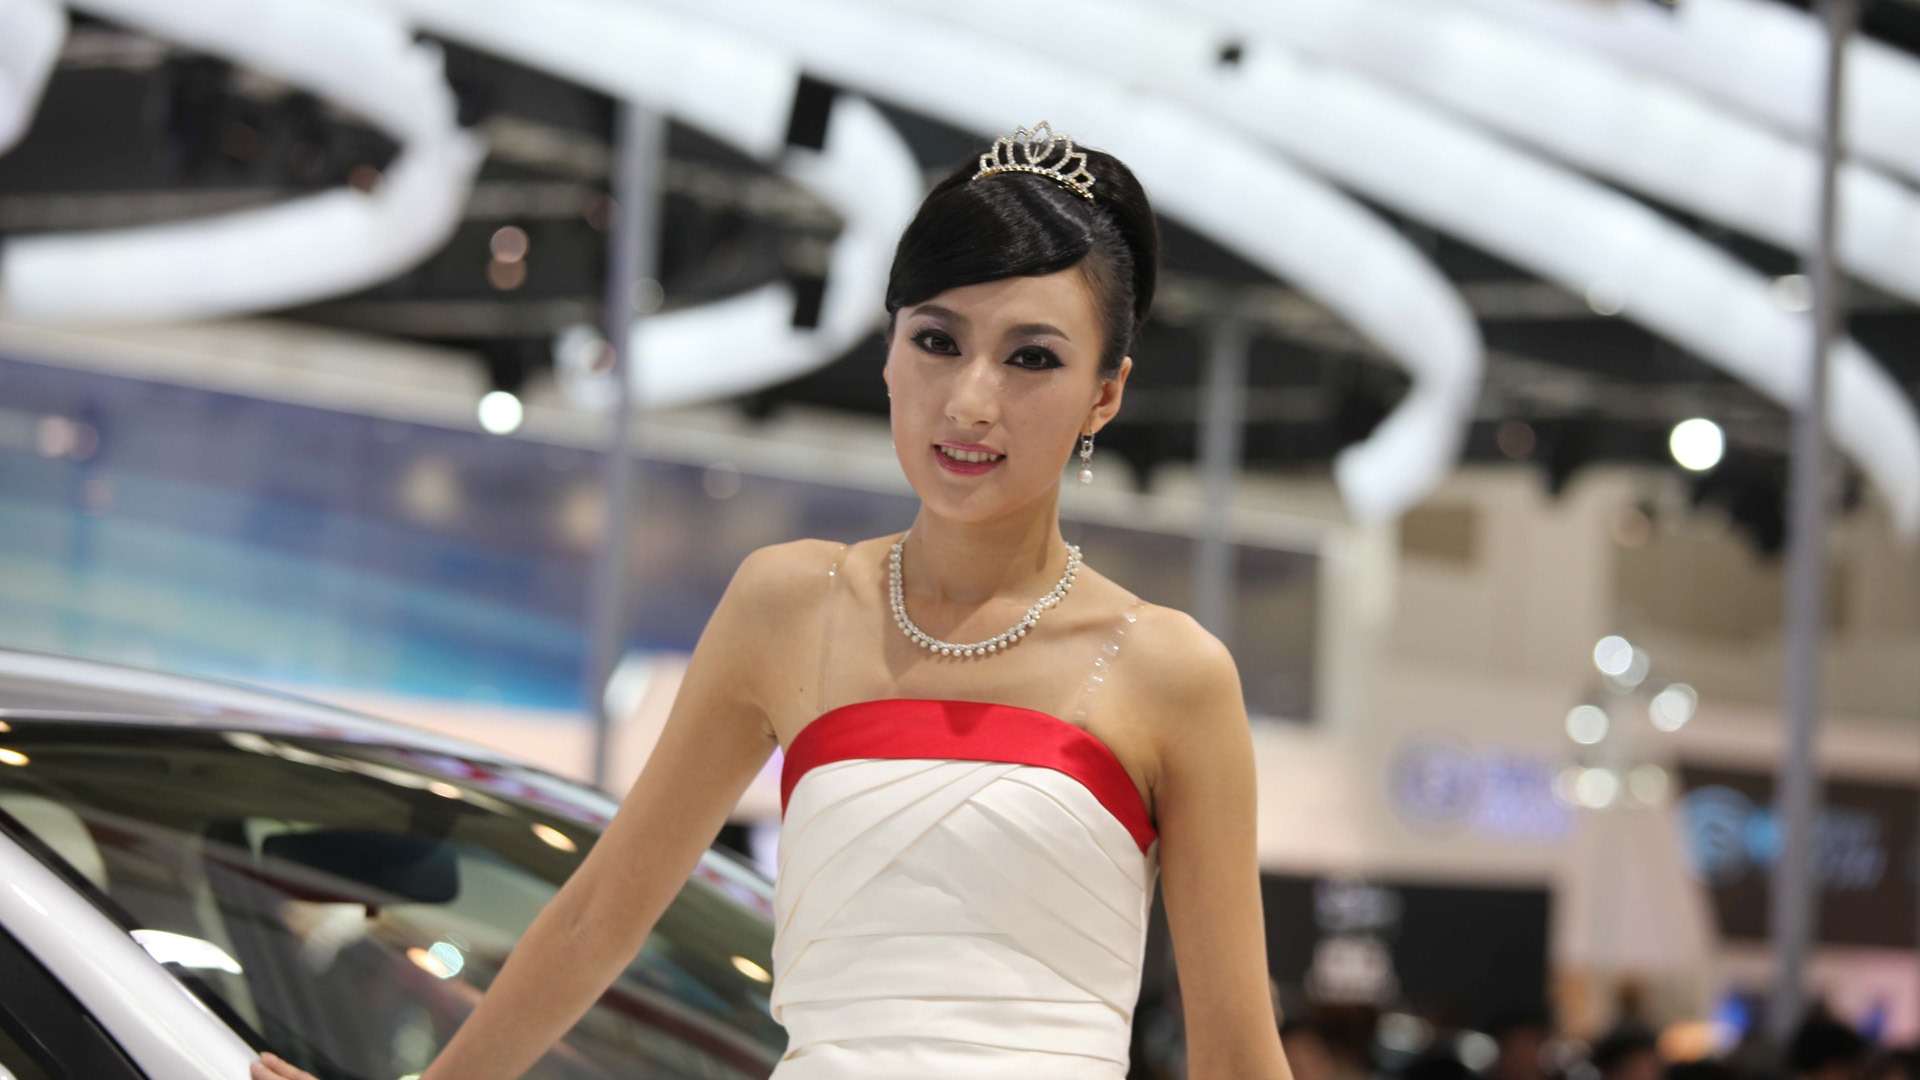 2010 Beijing International Auto Show beauty (1) (the wind chasing the clouds works) #27 - 1920x1080